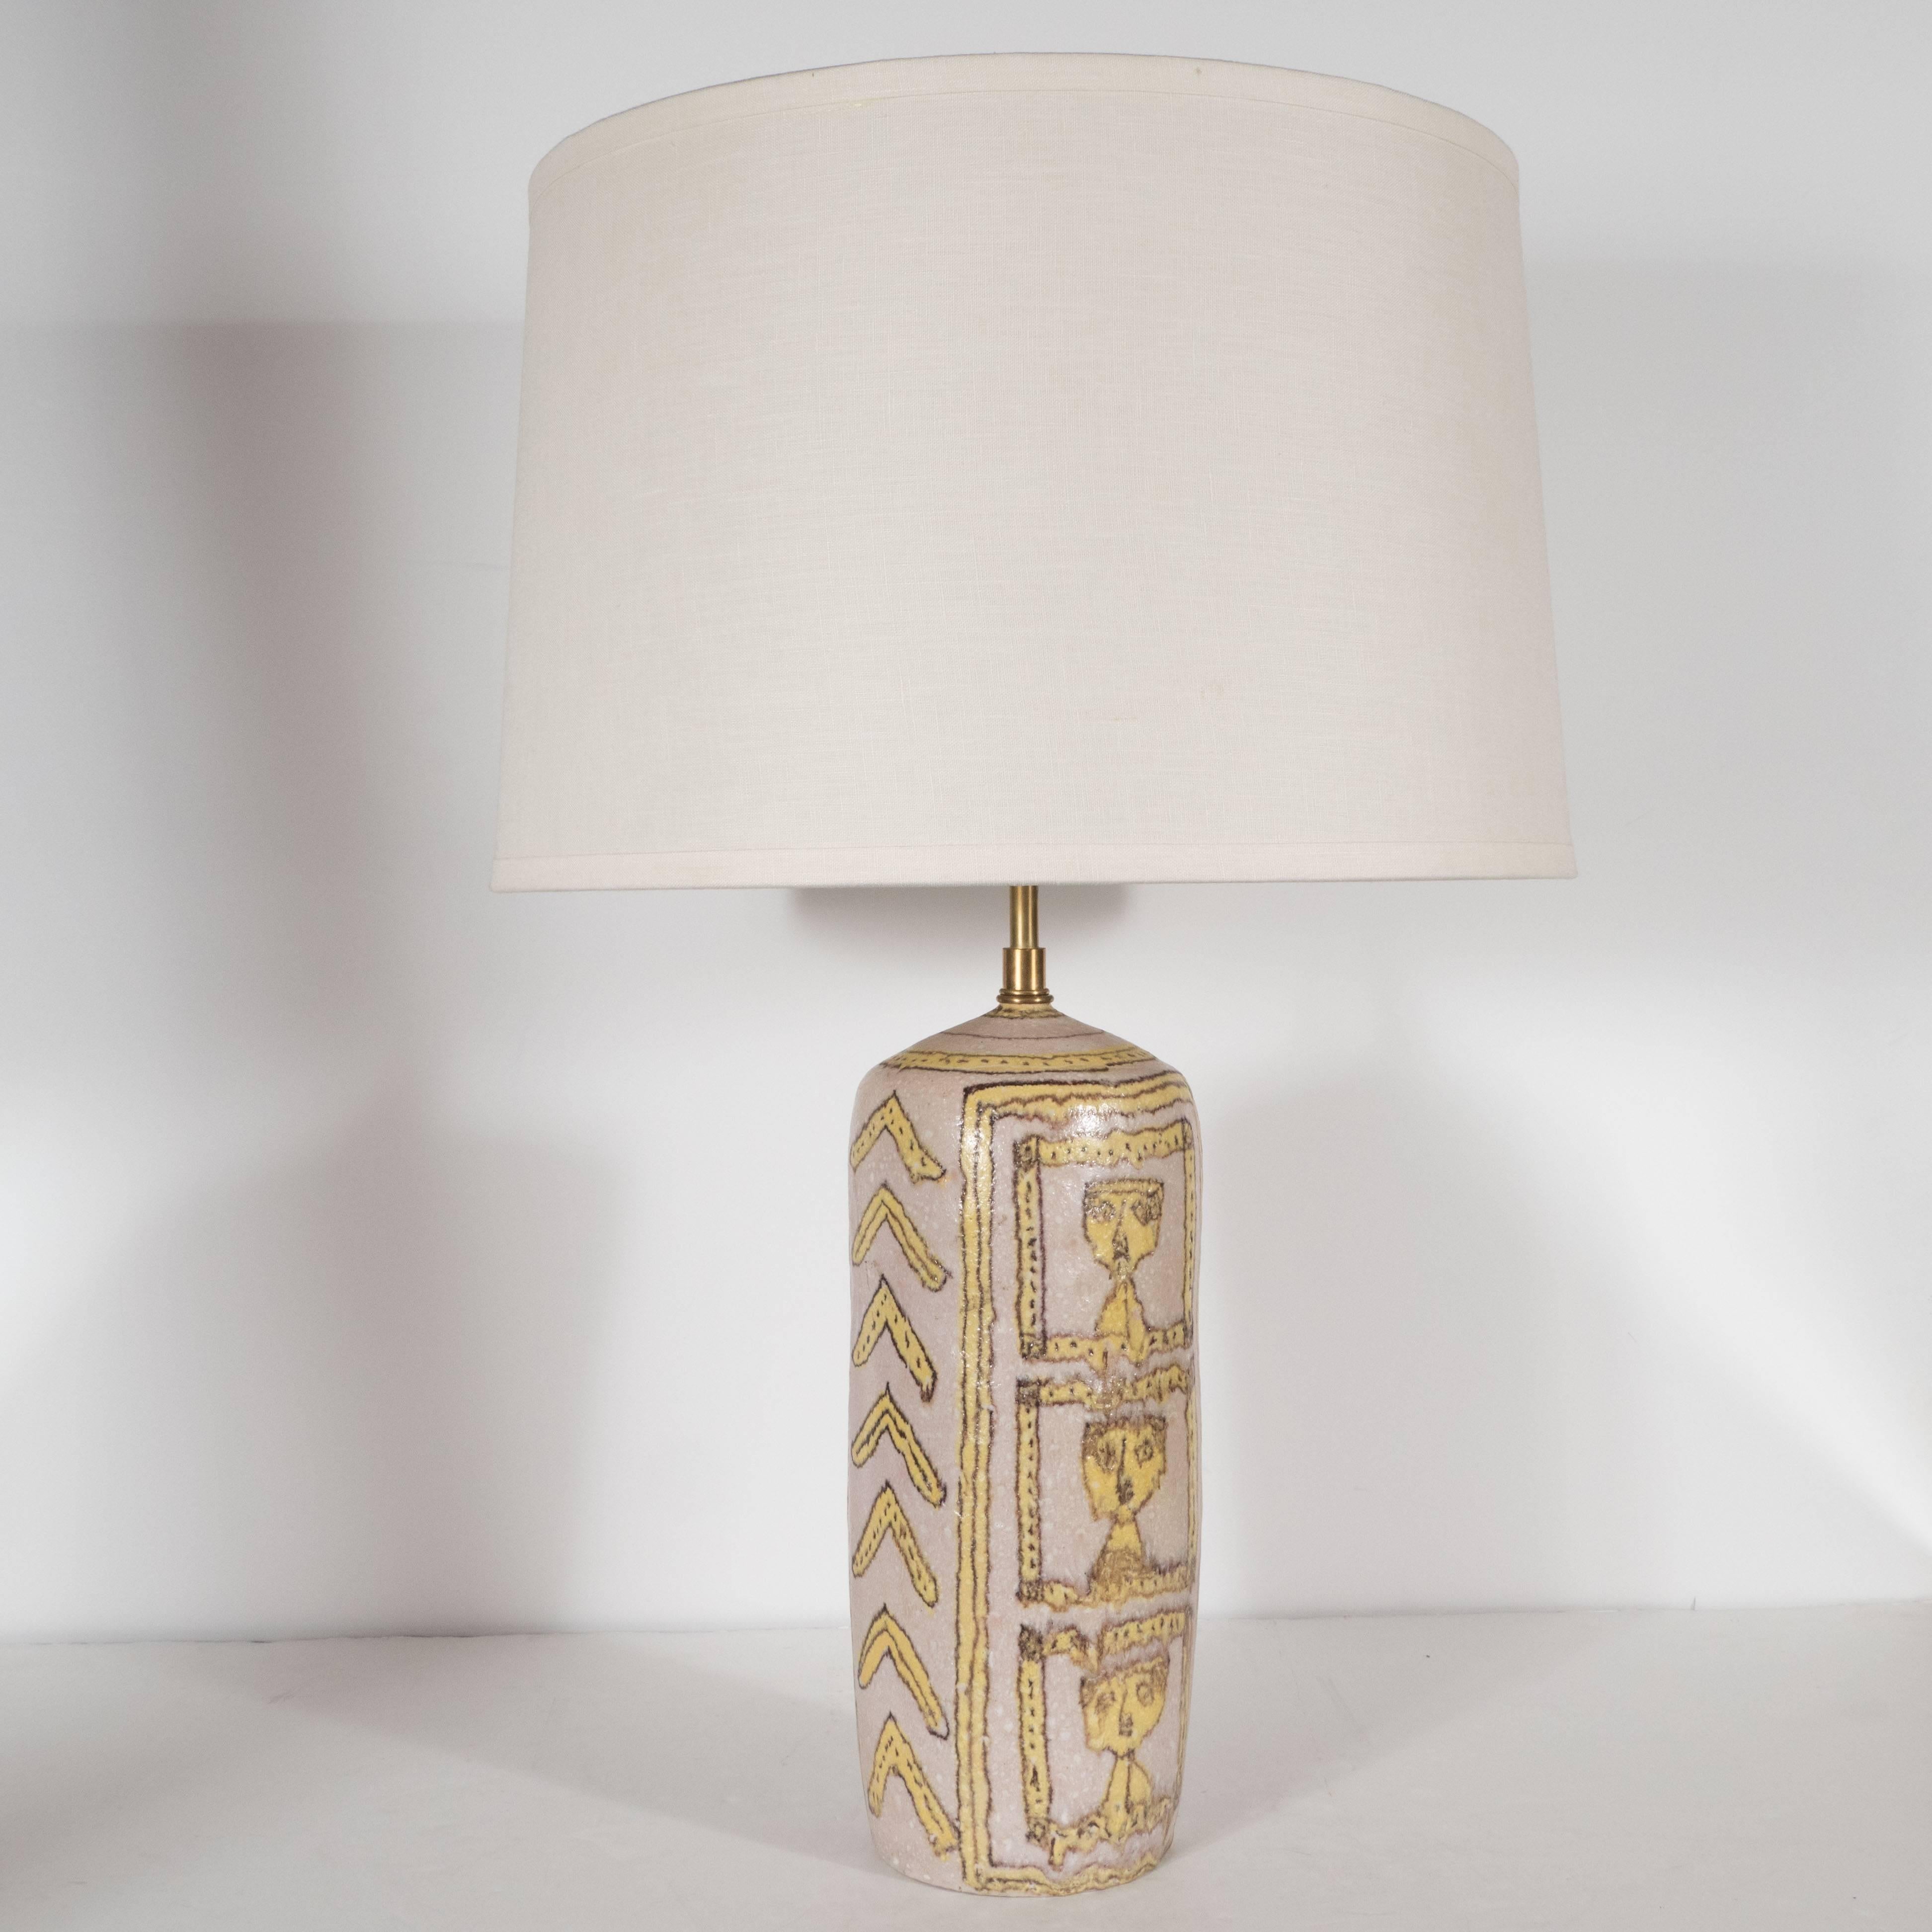 The hugely influential Italian artist Guido Gambone designed this stylish table lamp, circa 1950, which was then sculpted, by hand, out of ceramic in Italy. Hand-painted in hues of lemon and chocolate brown against a thulian pink background, this